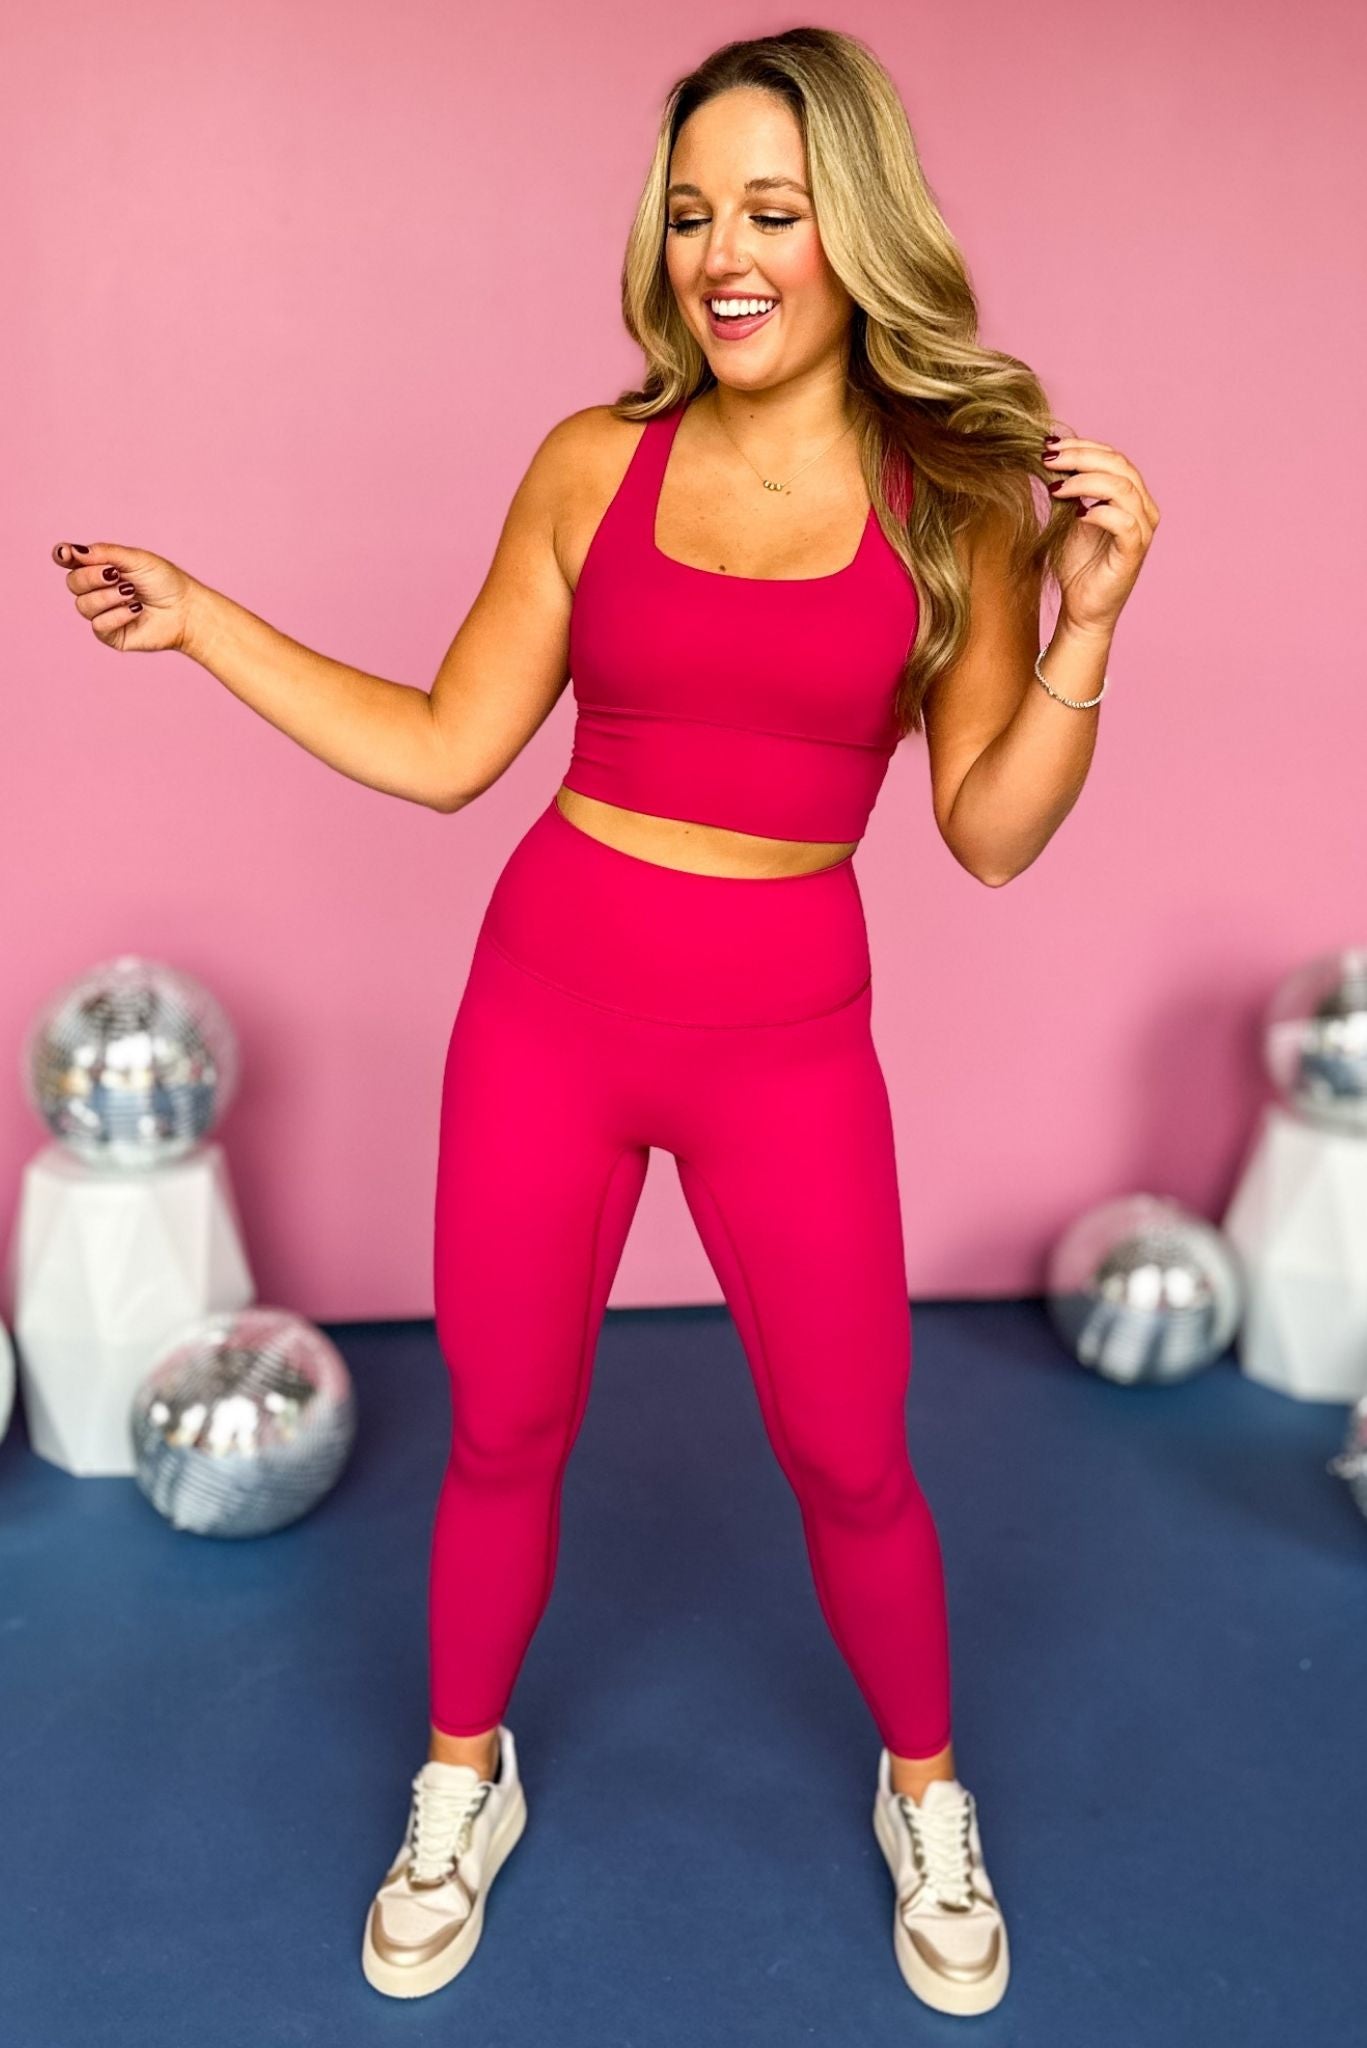 SSYS Magenta High Waist Seamless Butter Leggings, must have leggings, must have athleisure, elevated style, elevated athleisure, mom style, active style, active wear, fall athleisure, fall style, comfortable style, elevated comfort, shop style your senses by mallory fitzsimmons